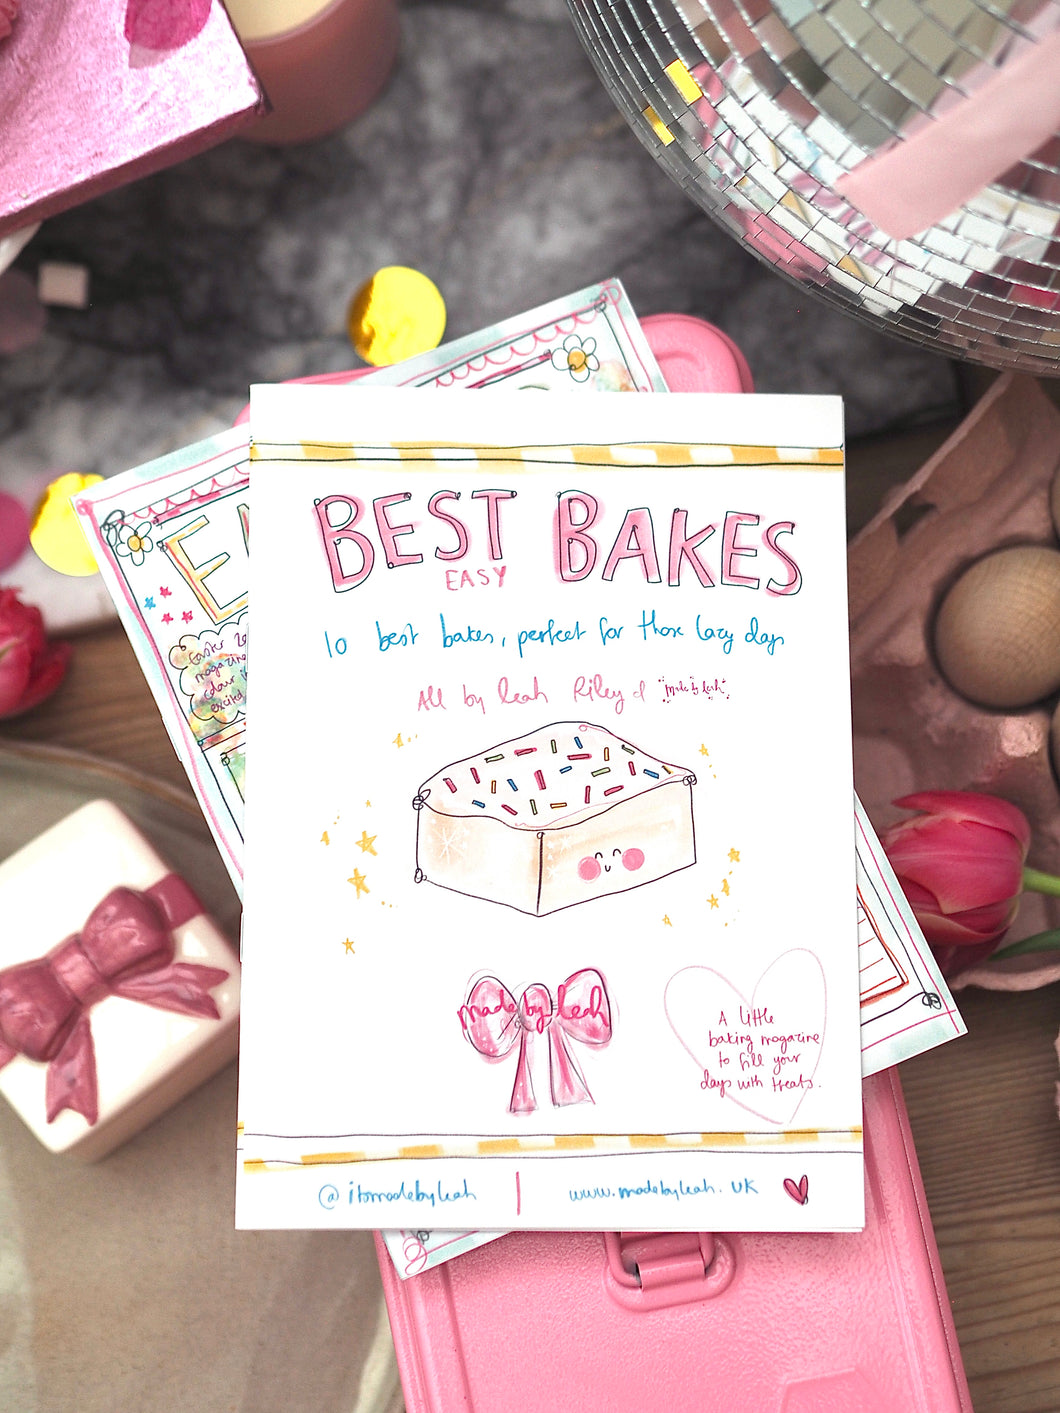 The Glossy 12 Page ‘Easy Bakes Magazine’